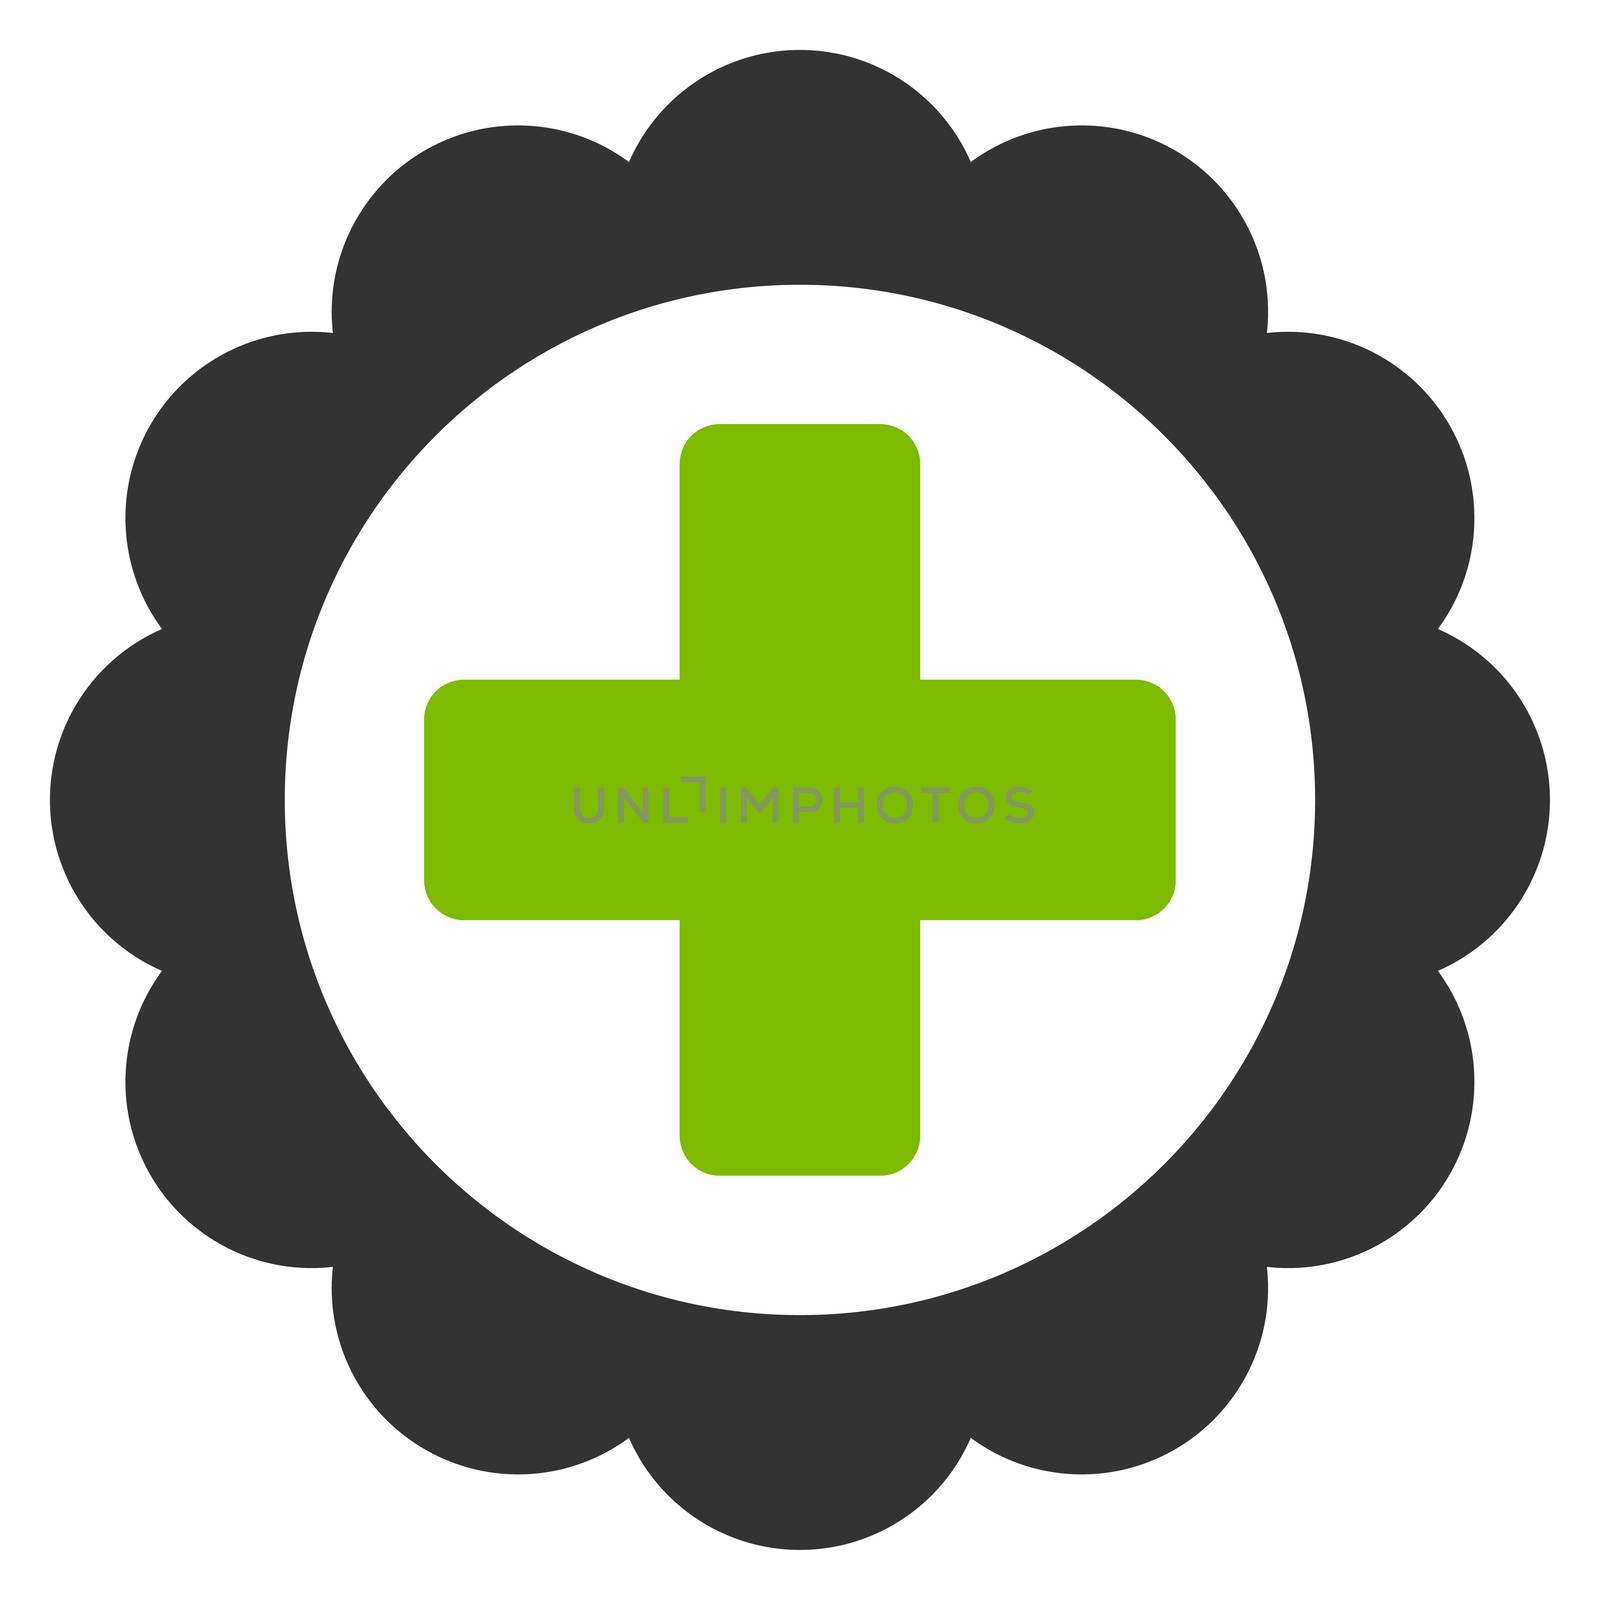 Medical Sticker raster icon. Style is bicolor flat symbol, eco green and gray colors, rounded angles, white background.